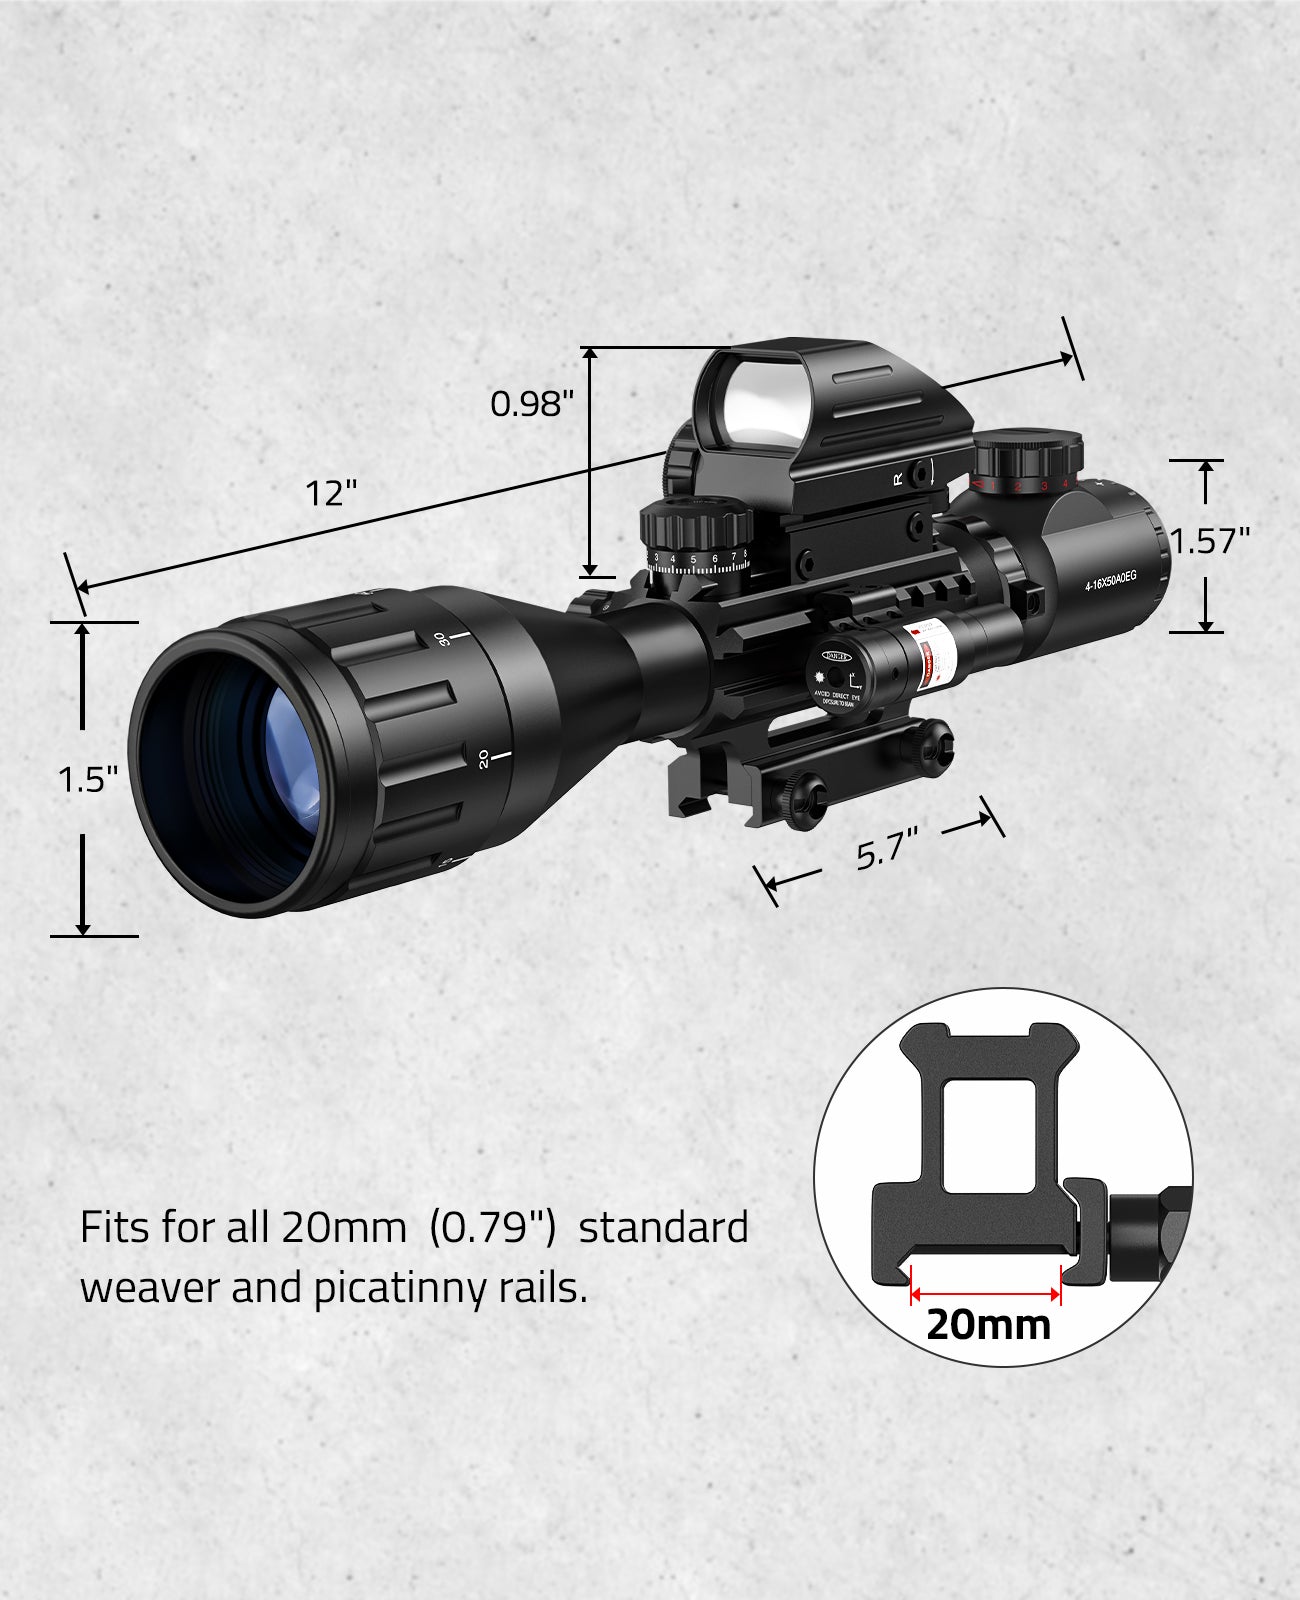 4-16x50AO Tactical Rifle Scope for 20mm Picatinny Rails